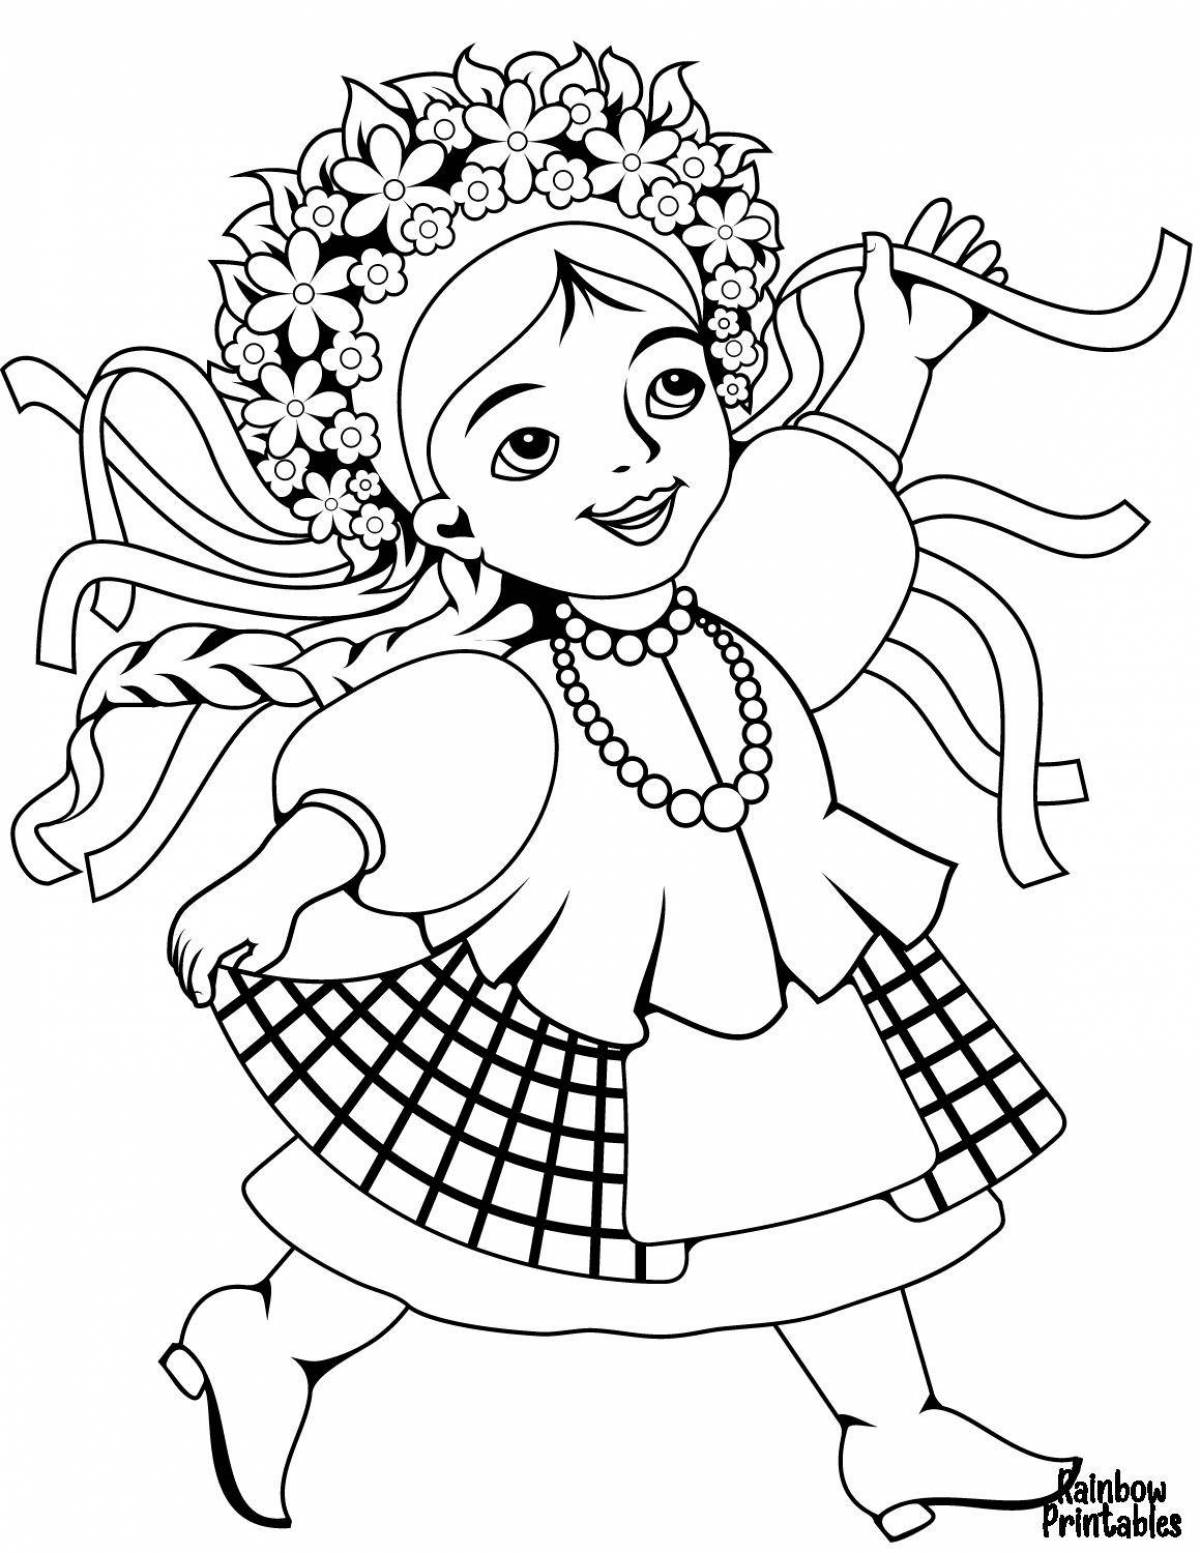 A fun Cossack coloring book for babies